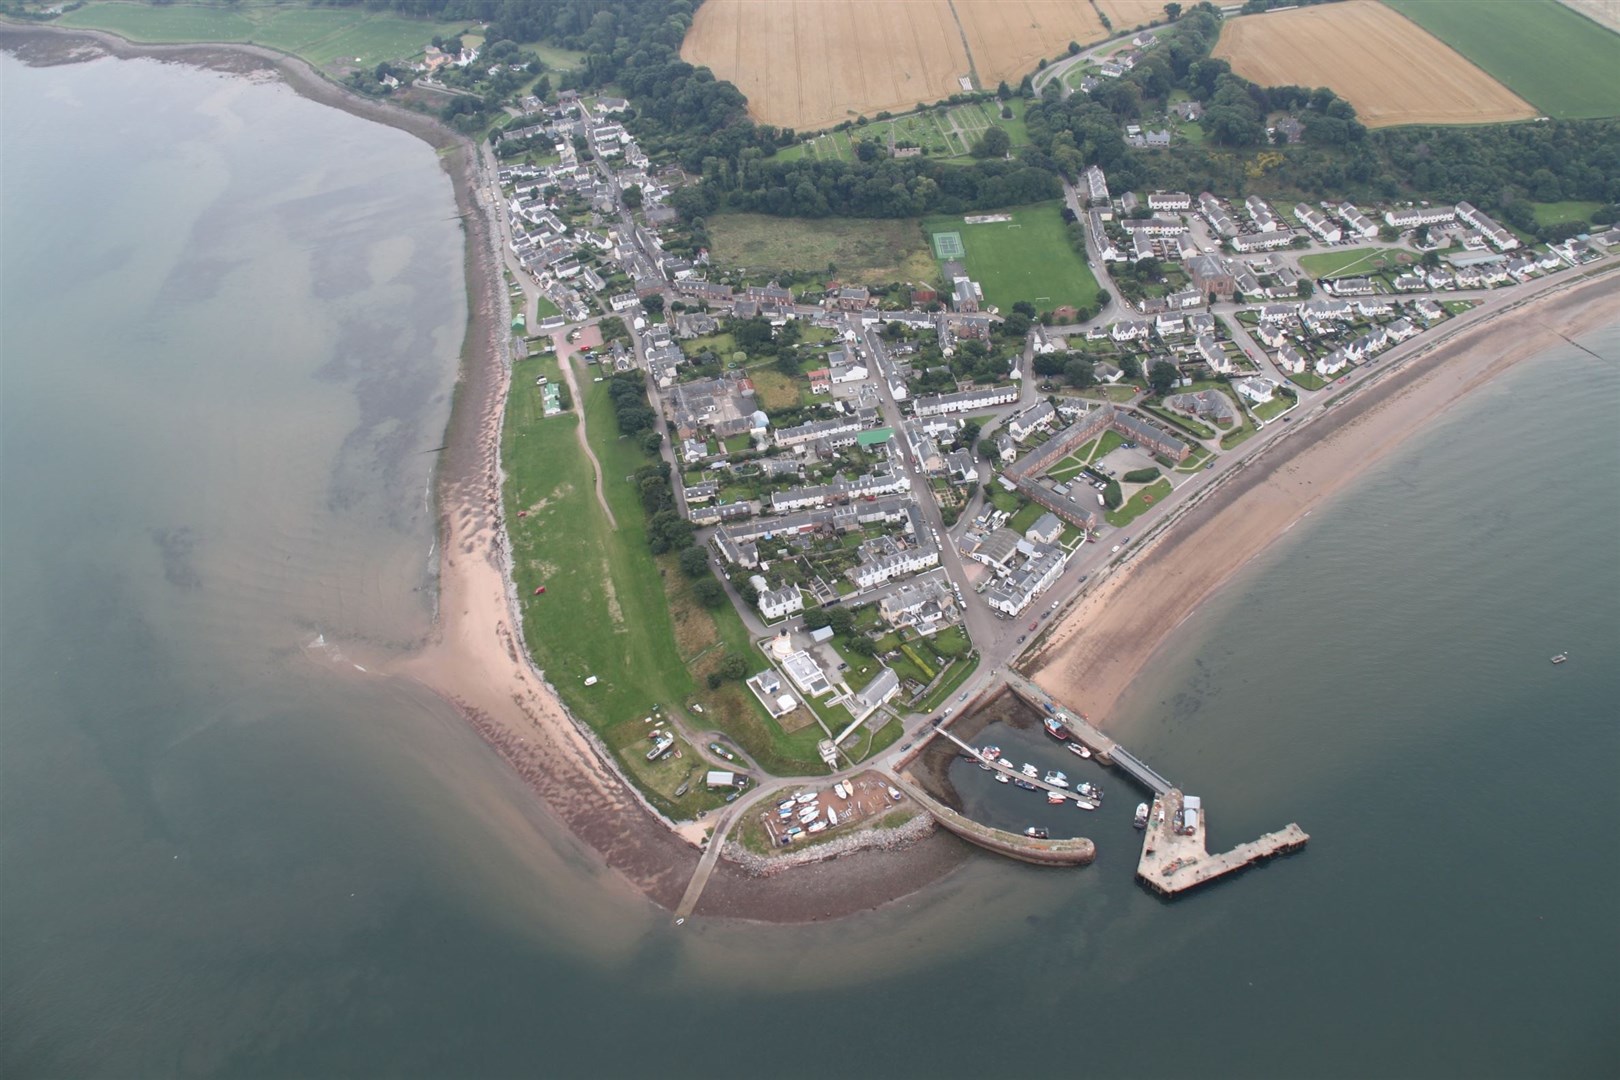 Cromarty from the air. A barrier aims to prevent tourists from causing problems on the links. Picture: Graeme Smith, via Wikimedia Commons.